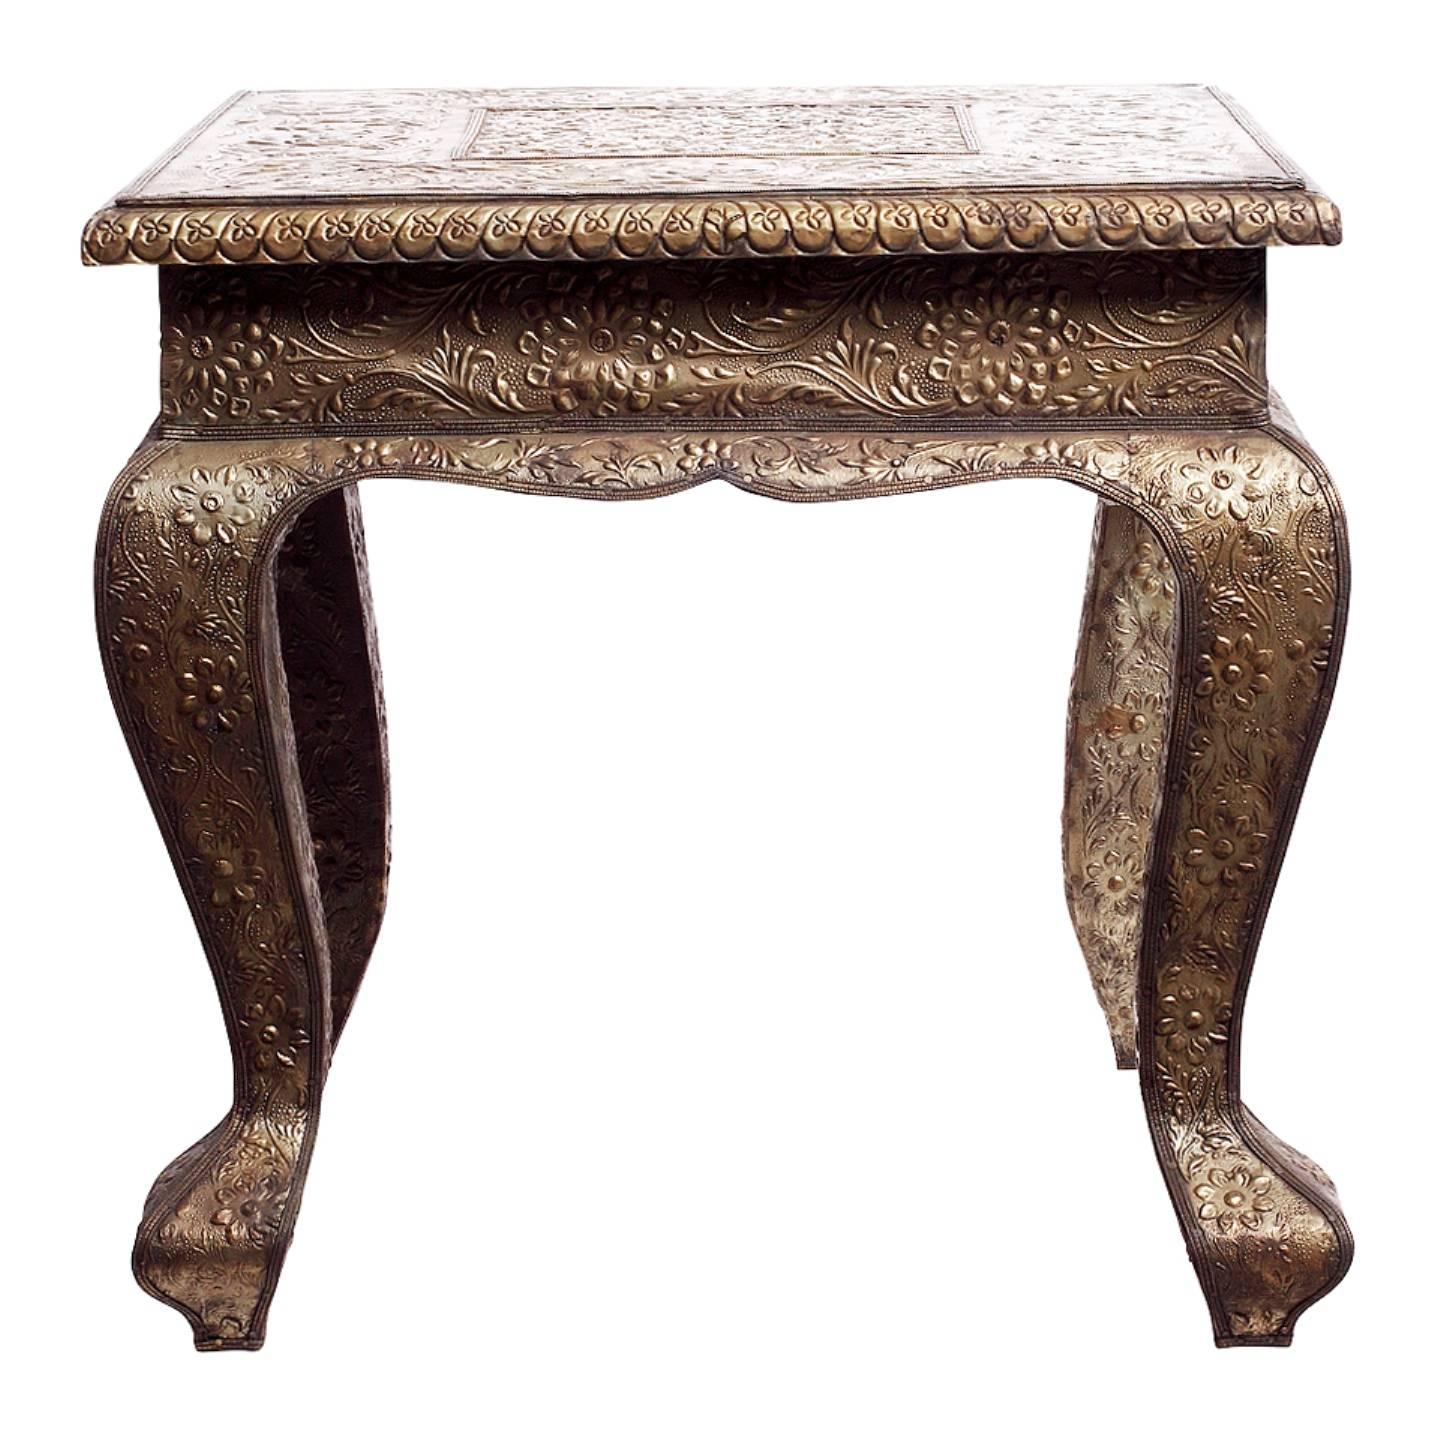 A square Indian table with flower patterns made with hammered and detailed silver. The table showcases a square top supported by four curved legs via a belt immediately below the top. The piece is made of hammered silver covered everywhere by